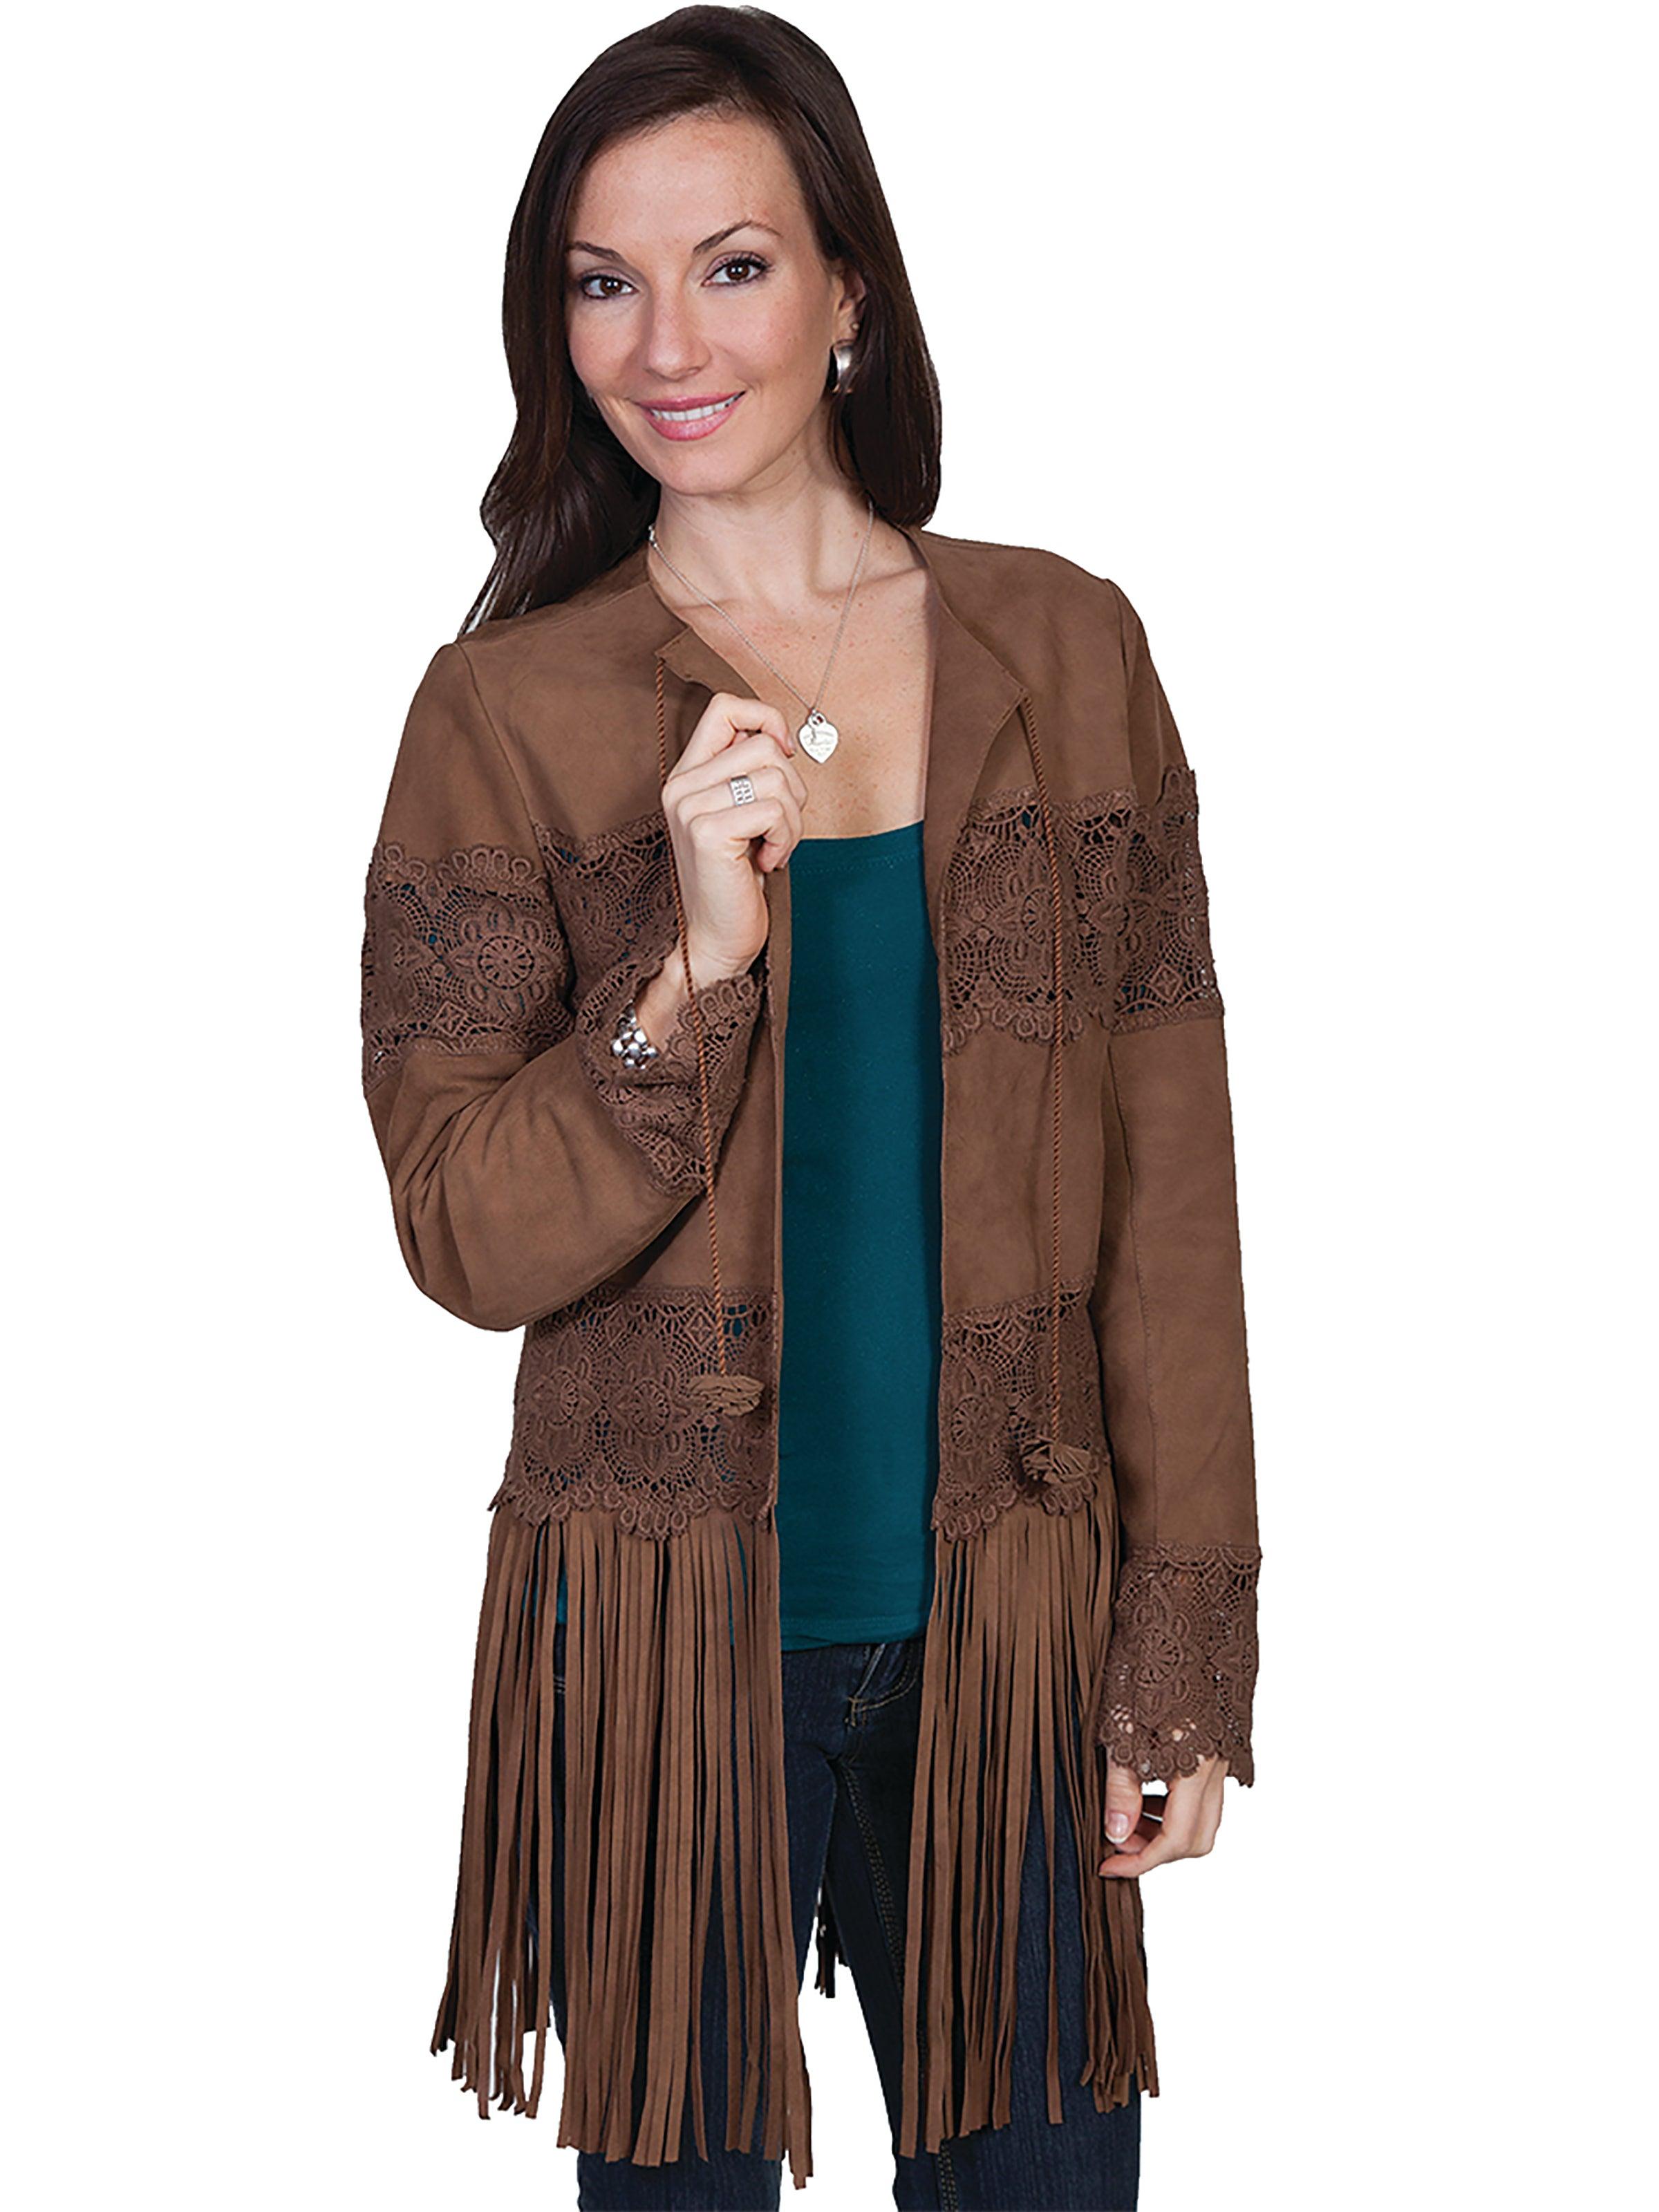 Scully BROWN LAMB SUEDE CROCHET LADIES JACKET - Flyclothing LLC